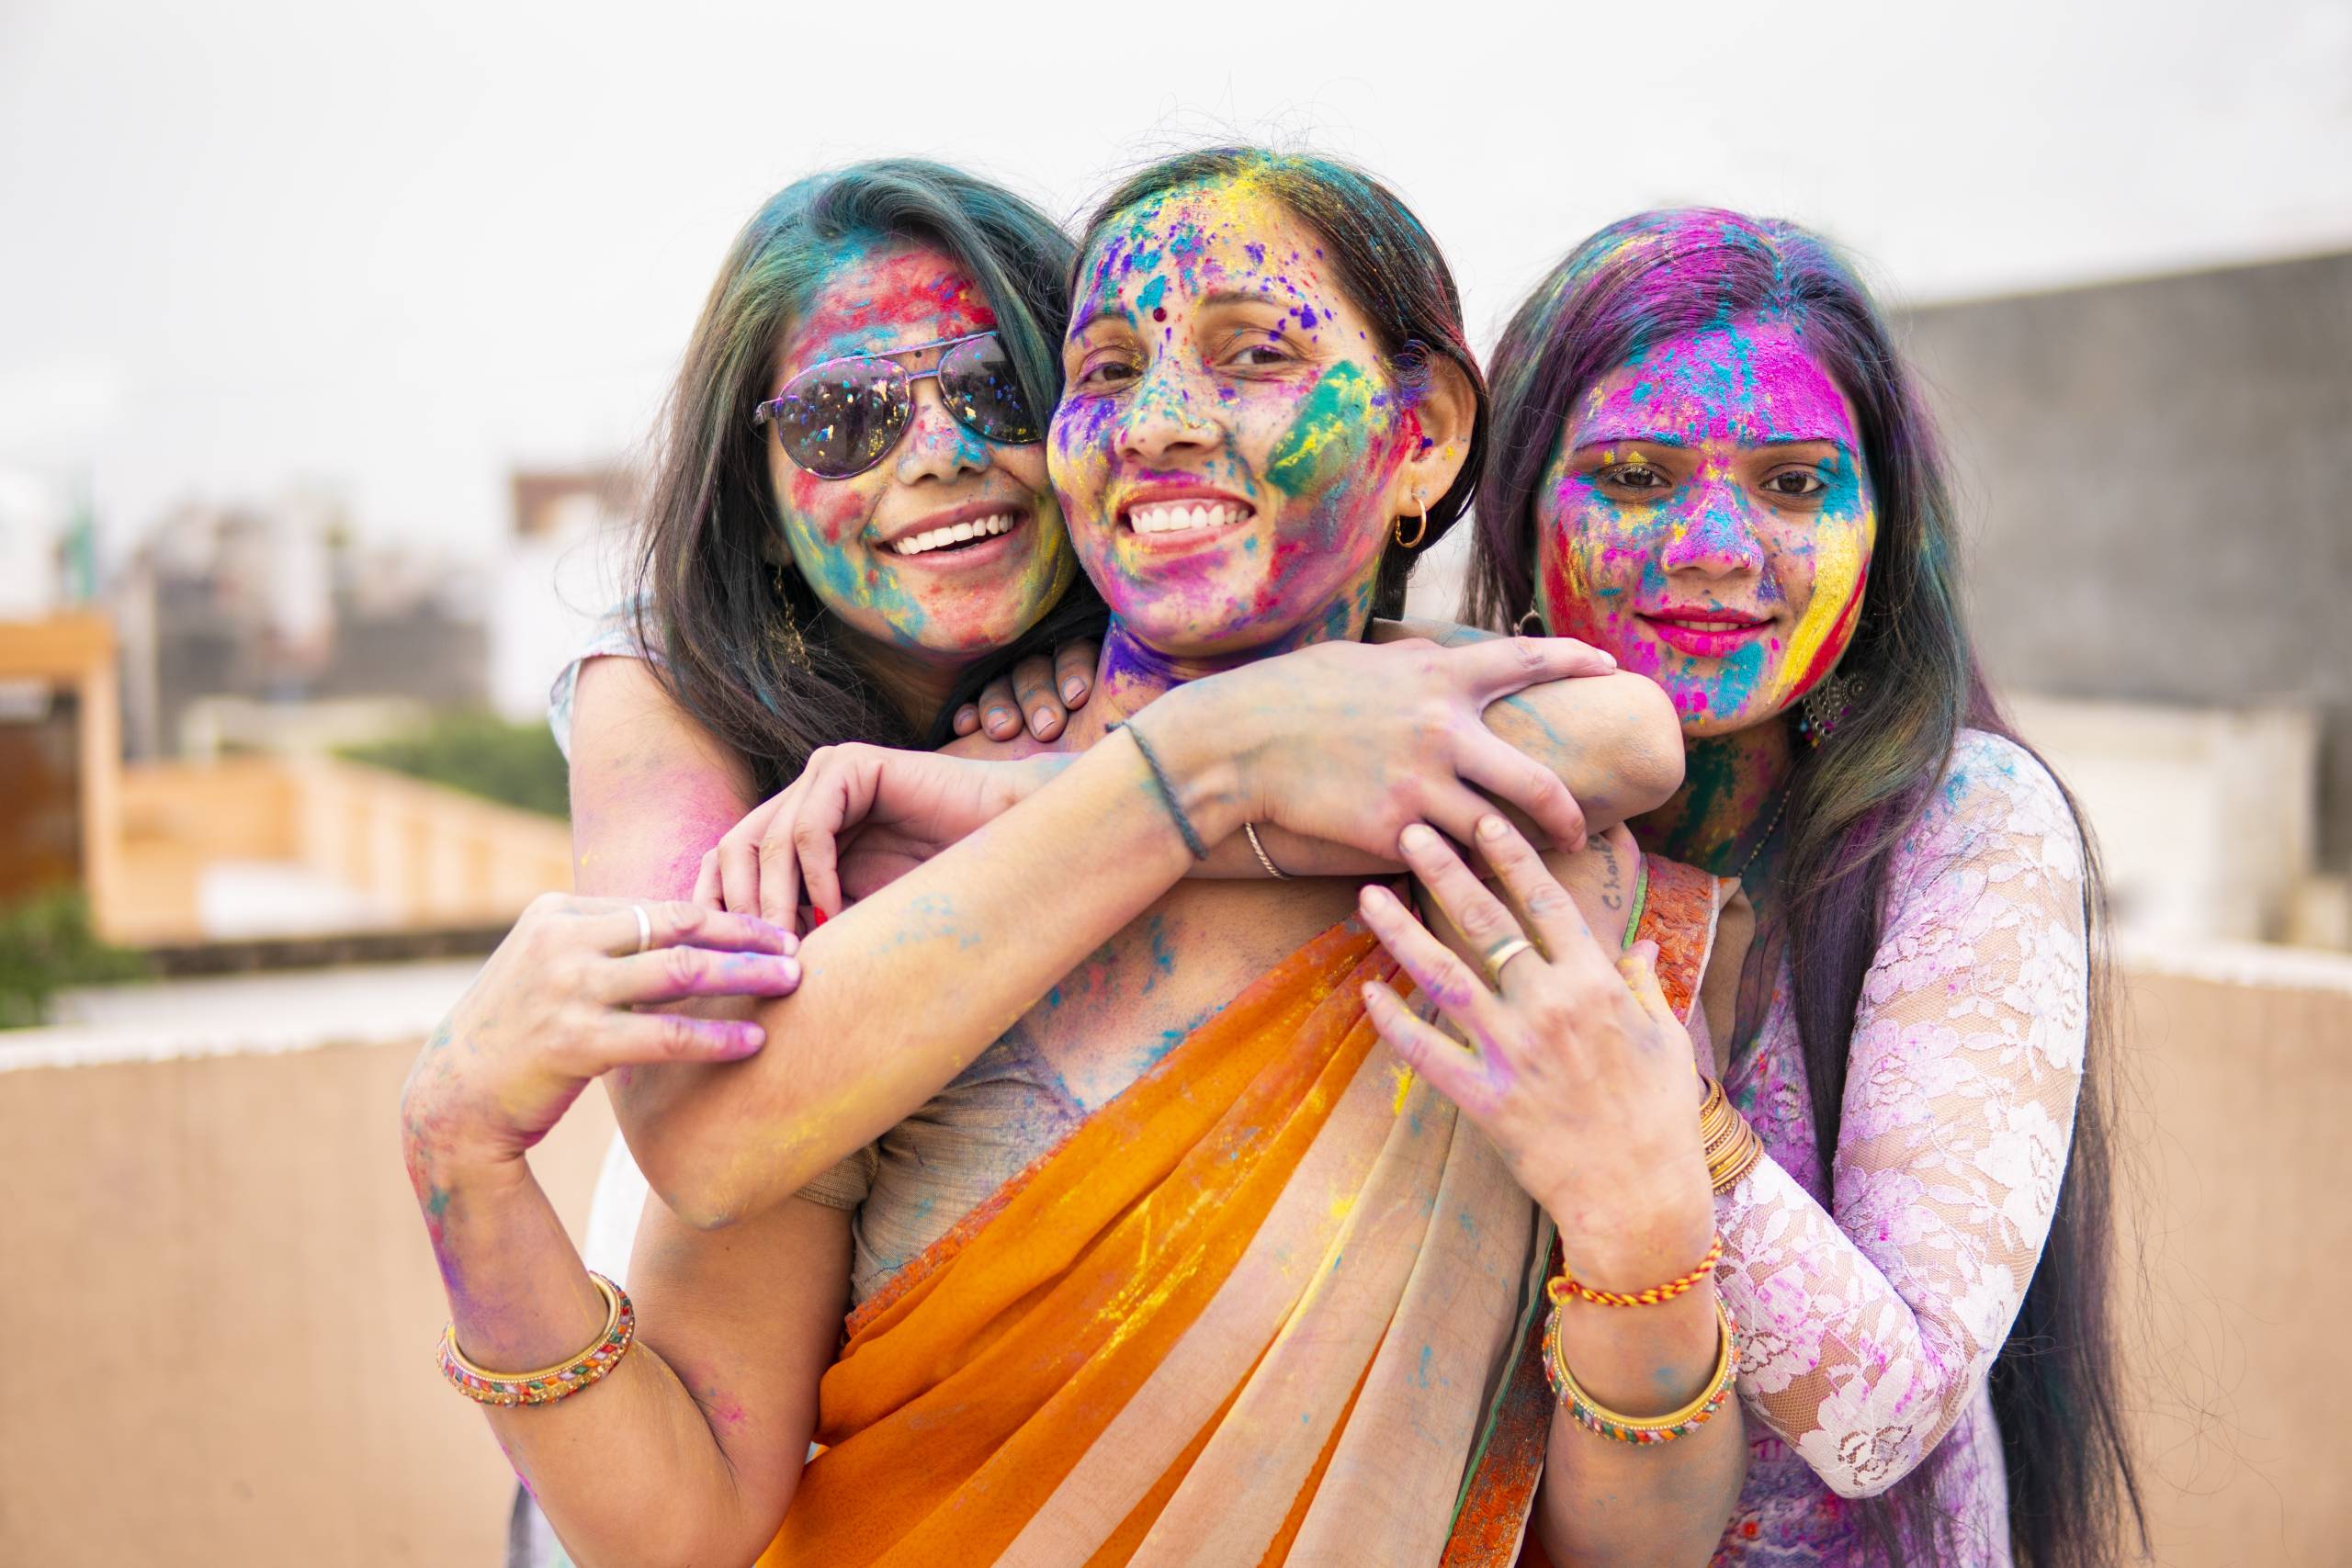 Outdoor image of Asian / Indian happy, beautiful mother daughters in Indian dress celebrating the Holi festival together with color powder. They are standing together and looking at the camera with a toothy smile.